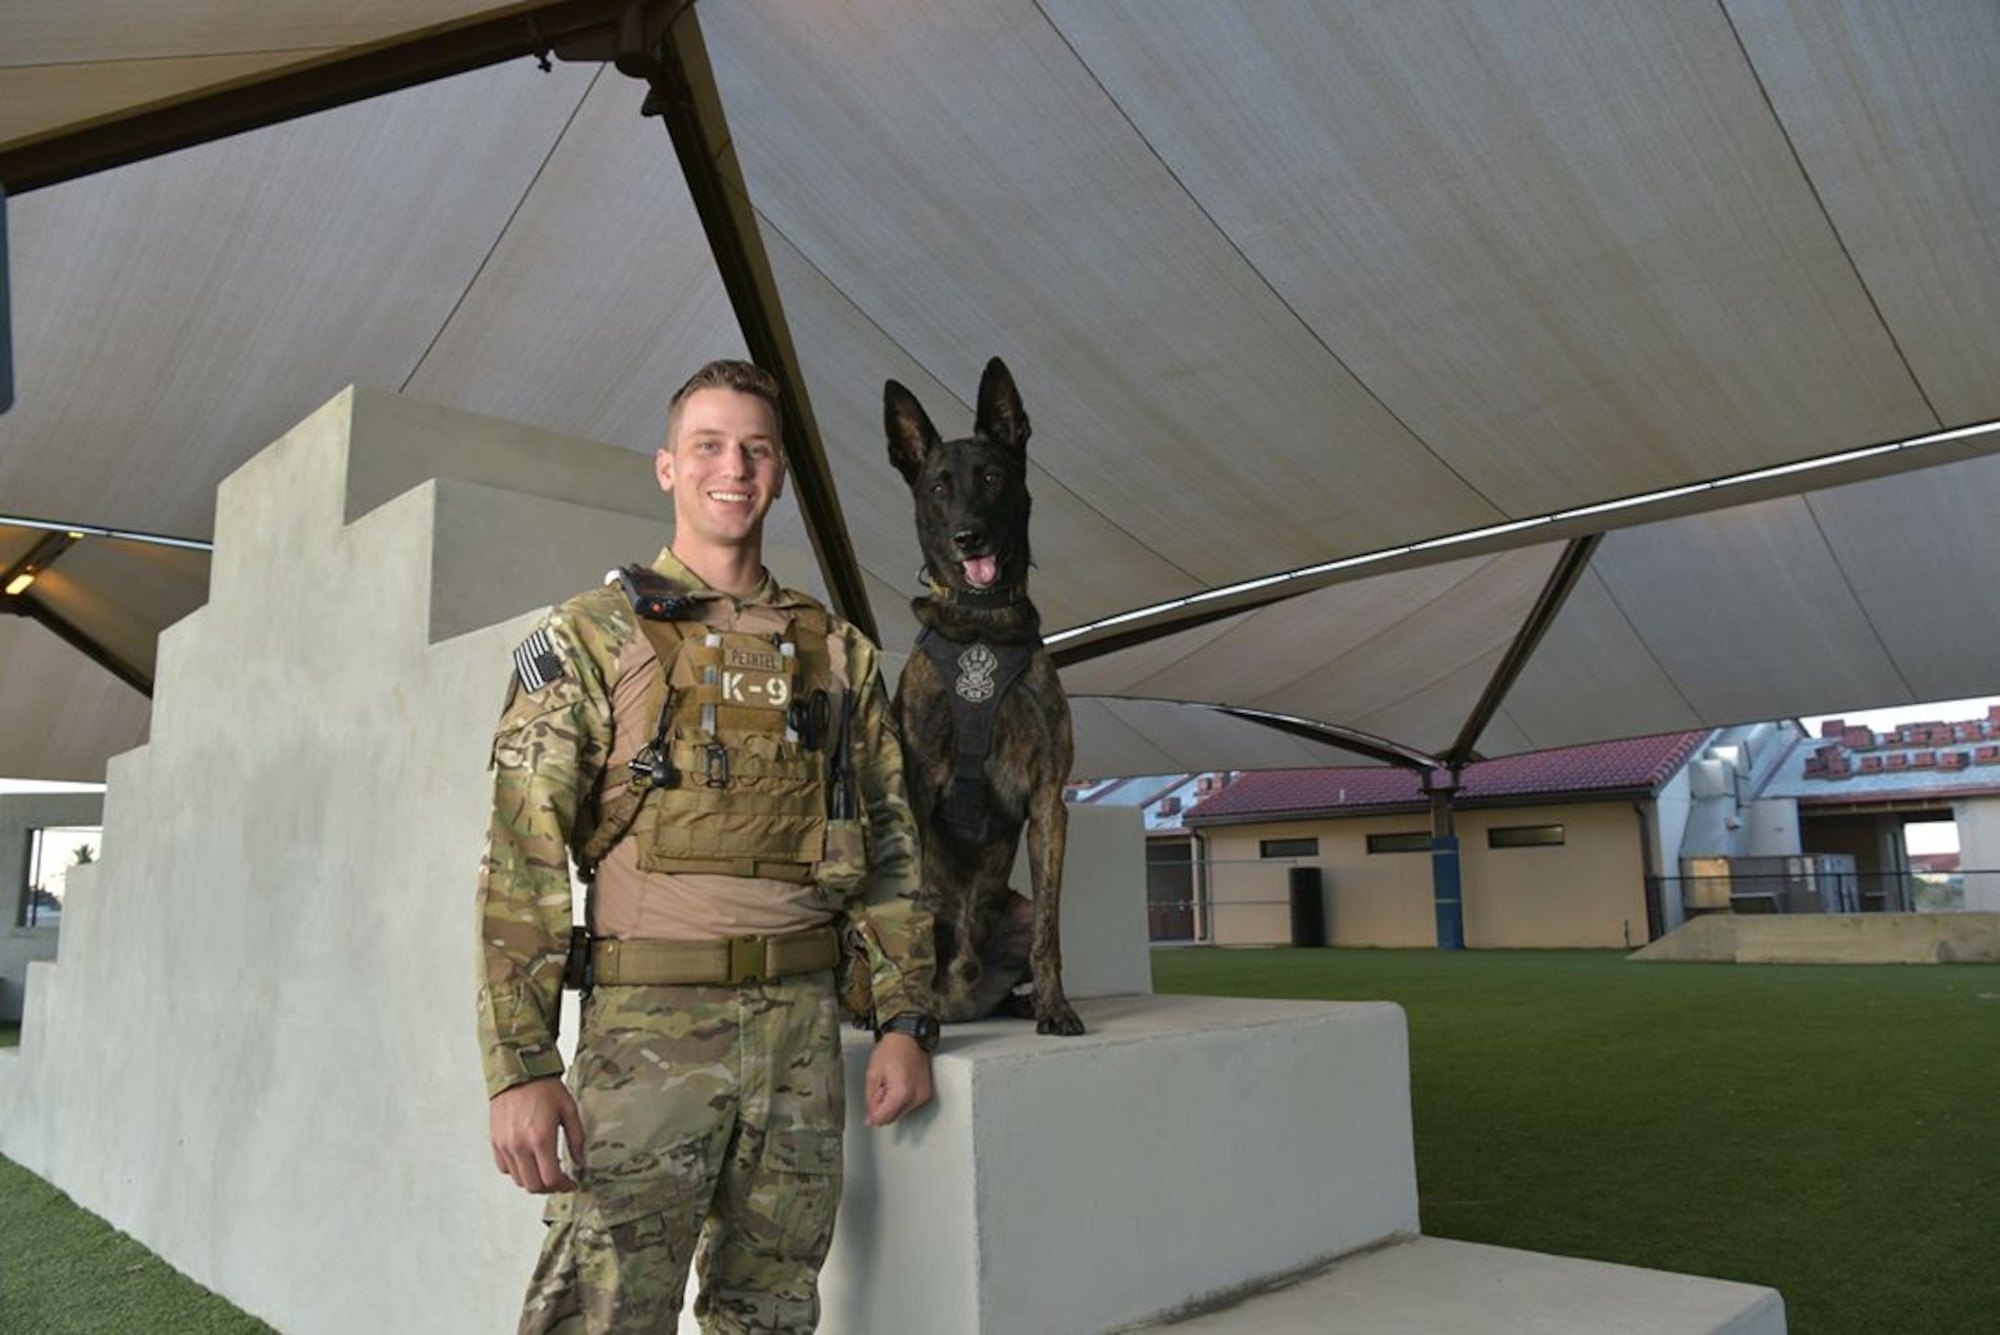 Staff Sgt. Kyle Pethtel, 45th Security Forces Squadron military working dog handler, poses for a photo with Pieter, 45th SFS military working dog, at Patrick Air Force Base, Fla., Nov. 26, 2019. Pethtel and Pieter have been a MWD team since July 2019. (U.S. Air Force photo by Senior Airman Dalton Williams)